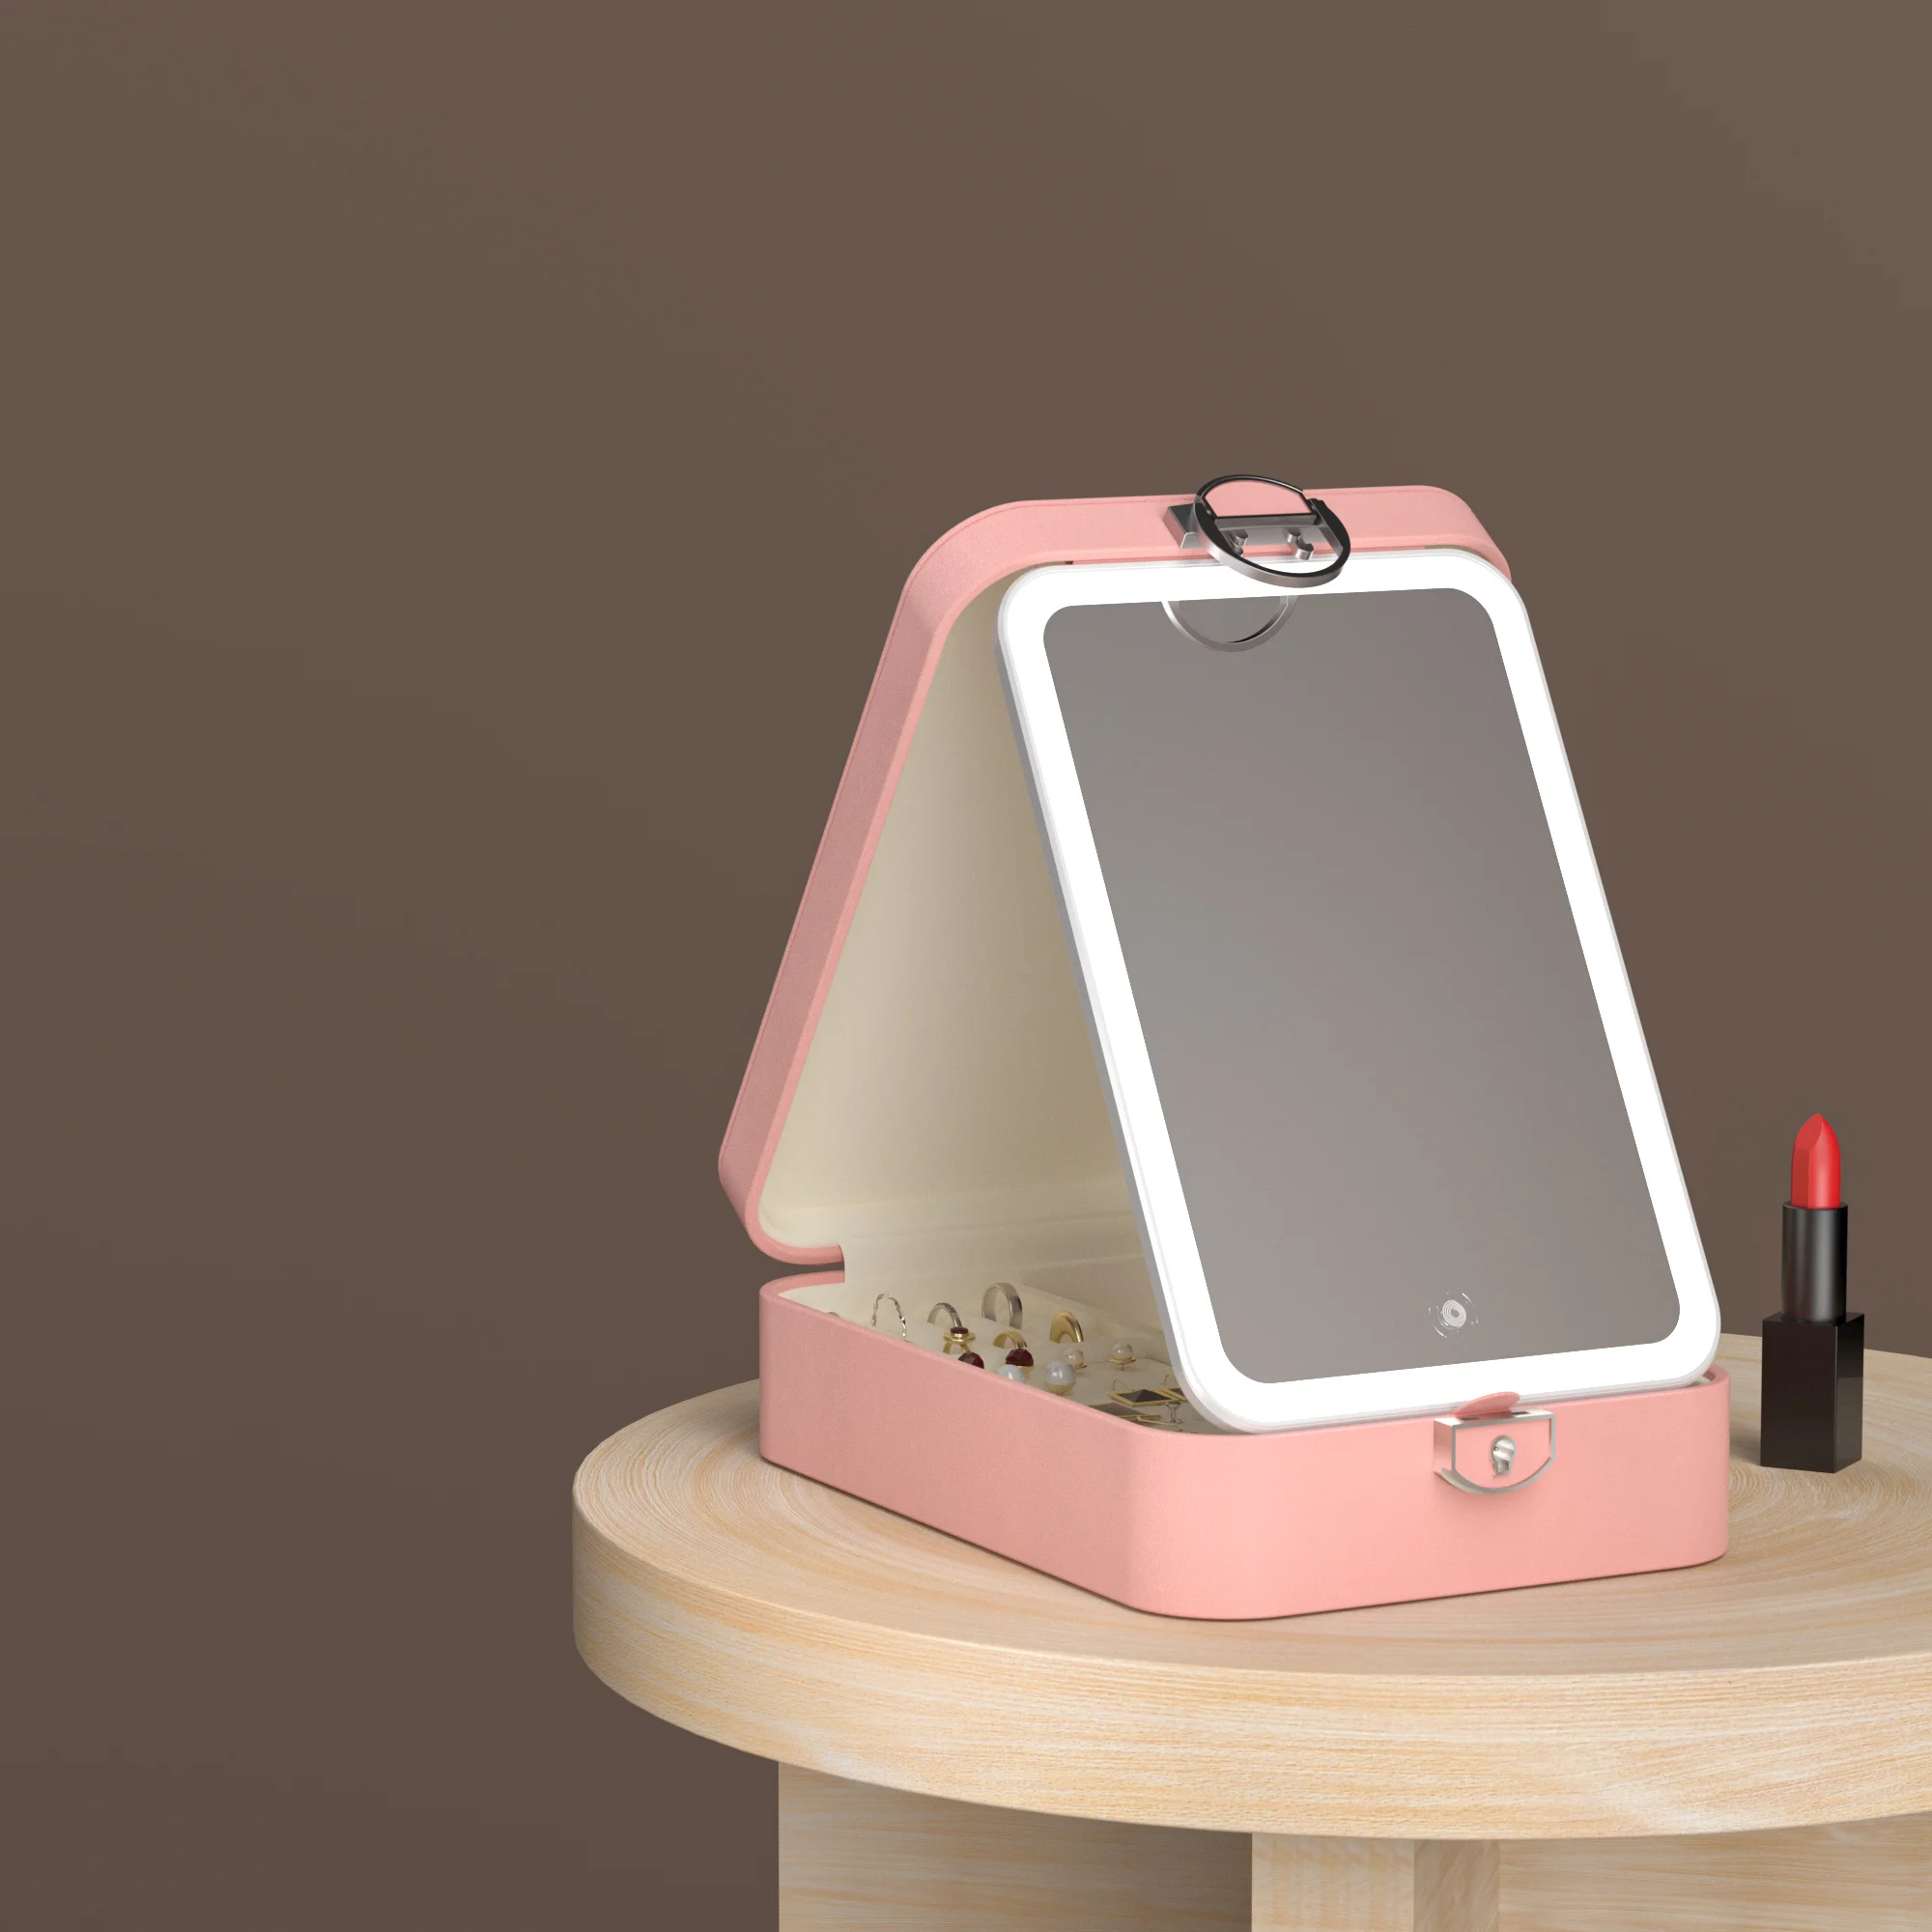 Travel Bag Portable Case Touch Sensor Switch Standing Mirror With Storage Vanity Makeup Mirror With Led Light